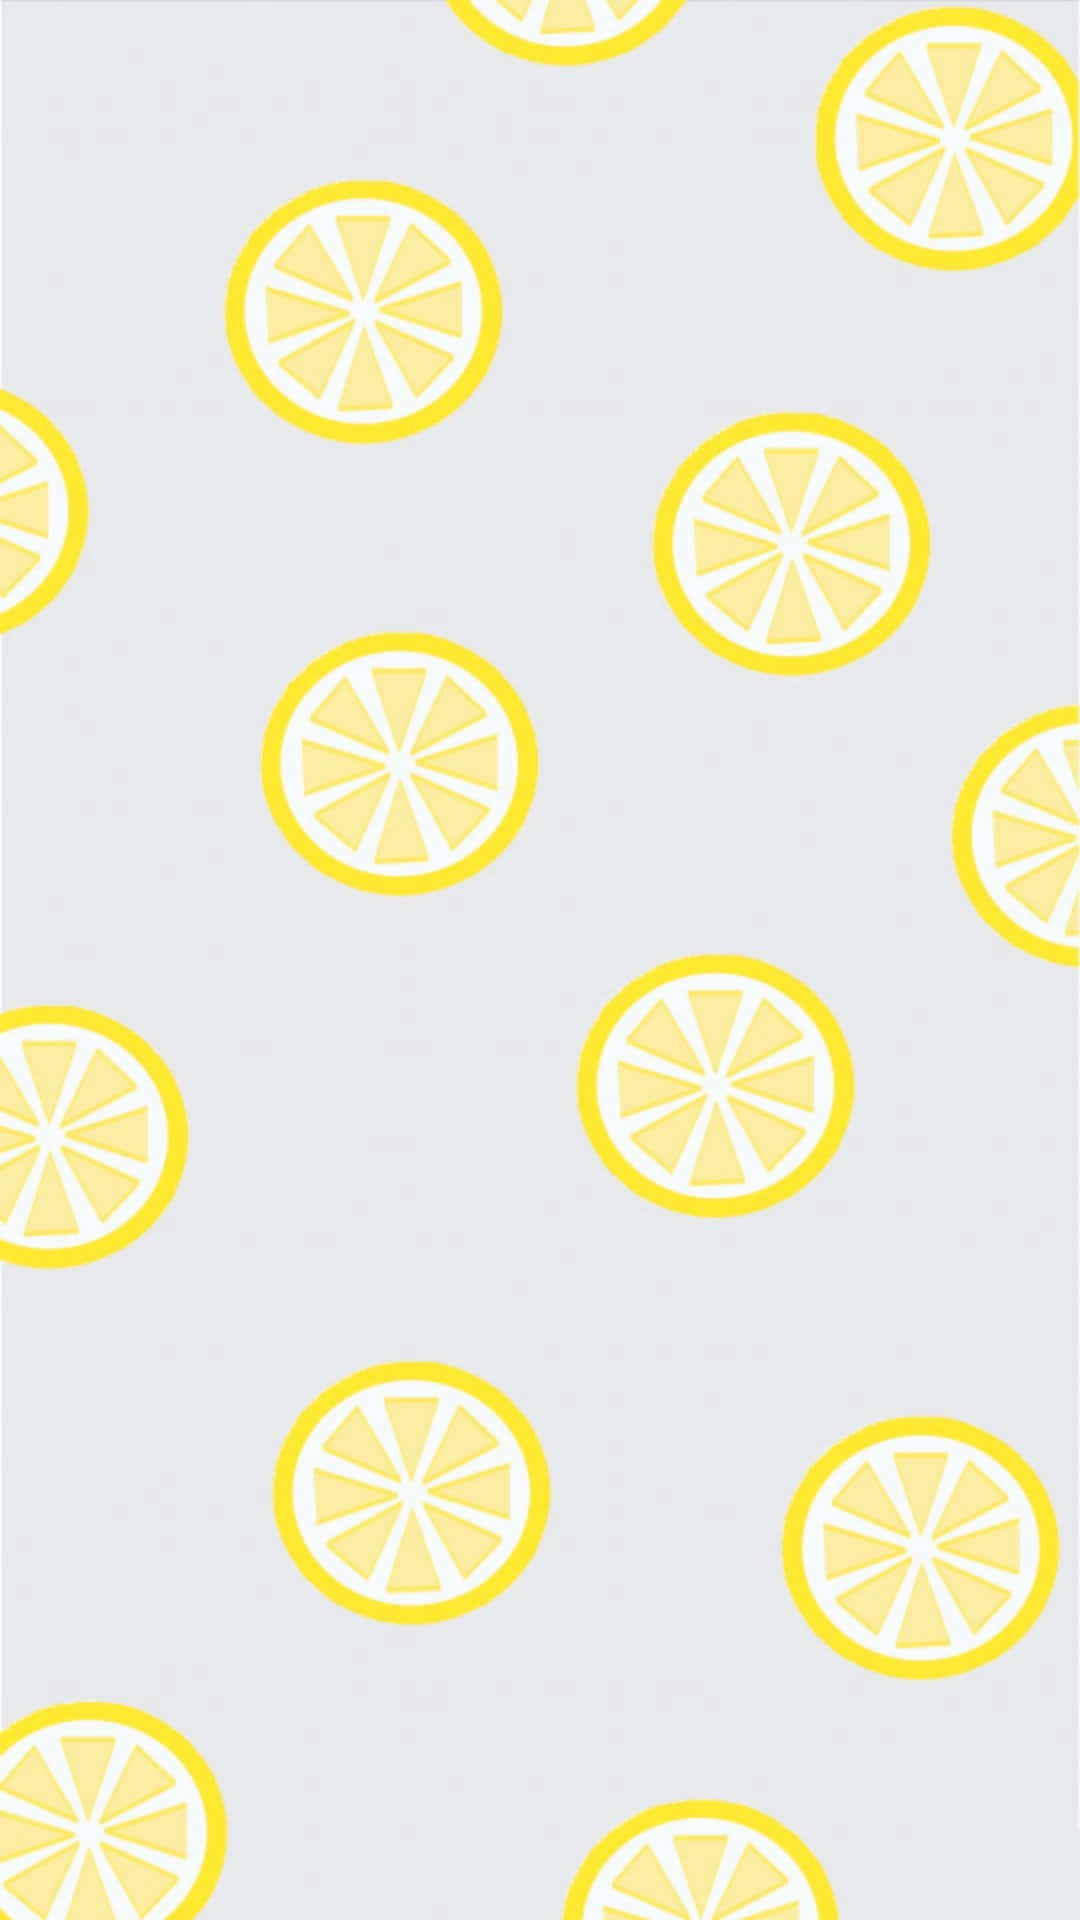 Fresh Yellow Aesthetic - Whether as a scent, a taste, or an aesthetic, lemon brings freshness to any moment. Wallpaper